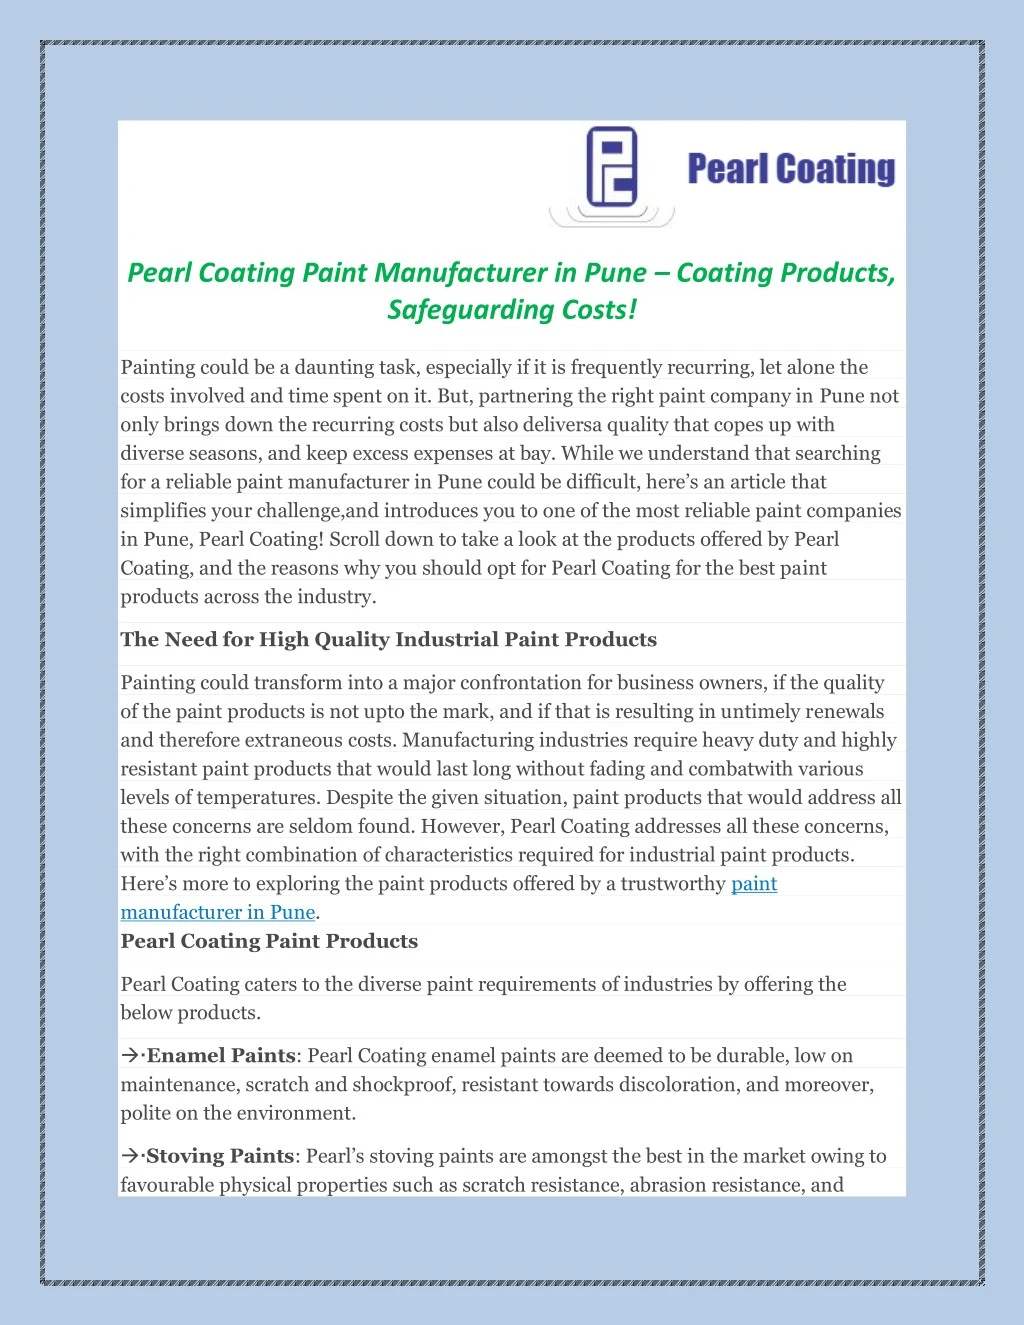 pearl coating paint manufacturer in pune coating